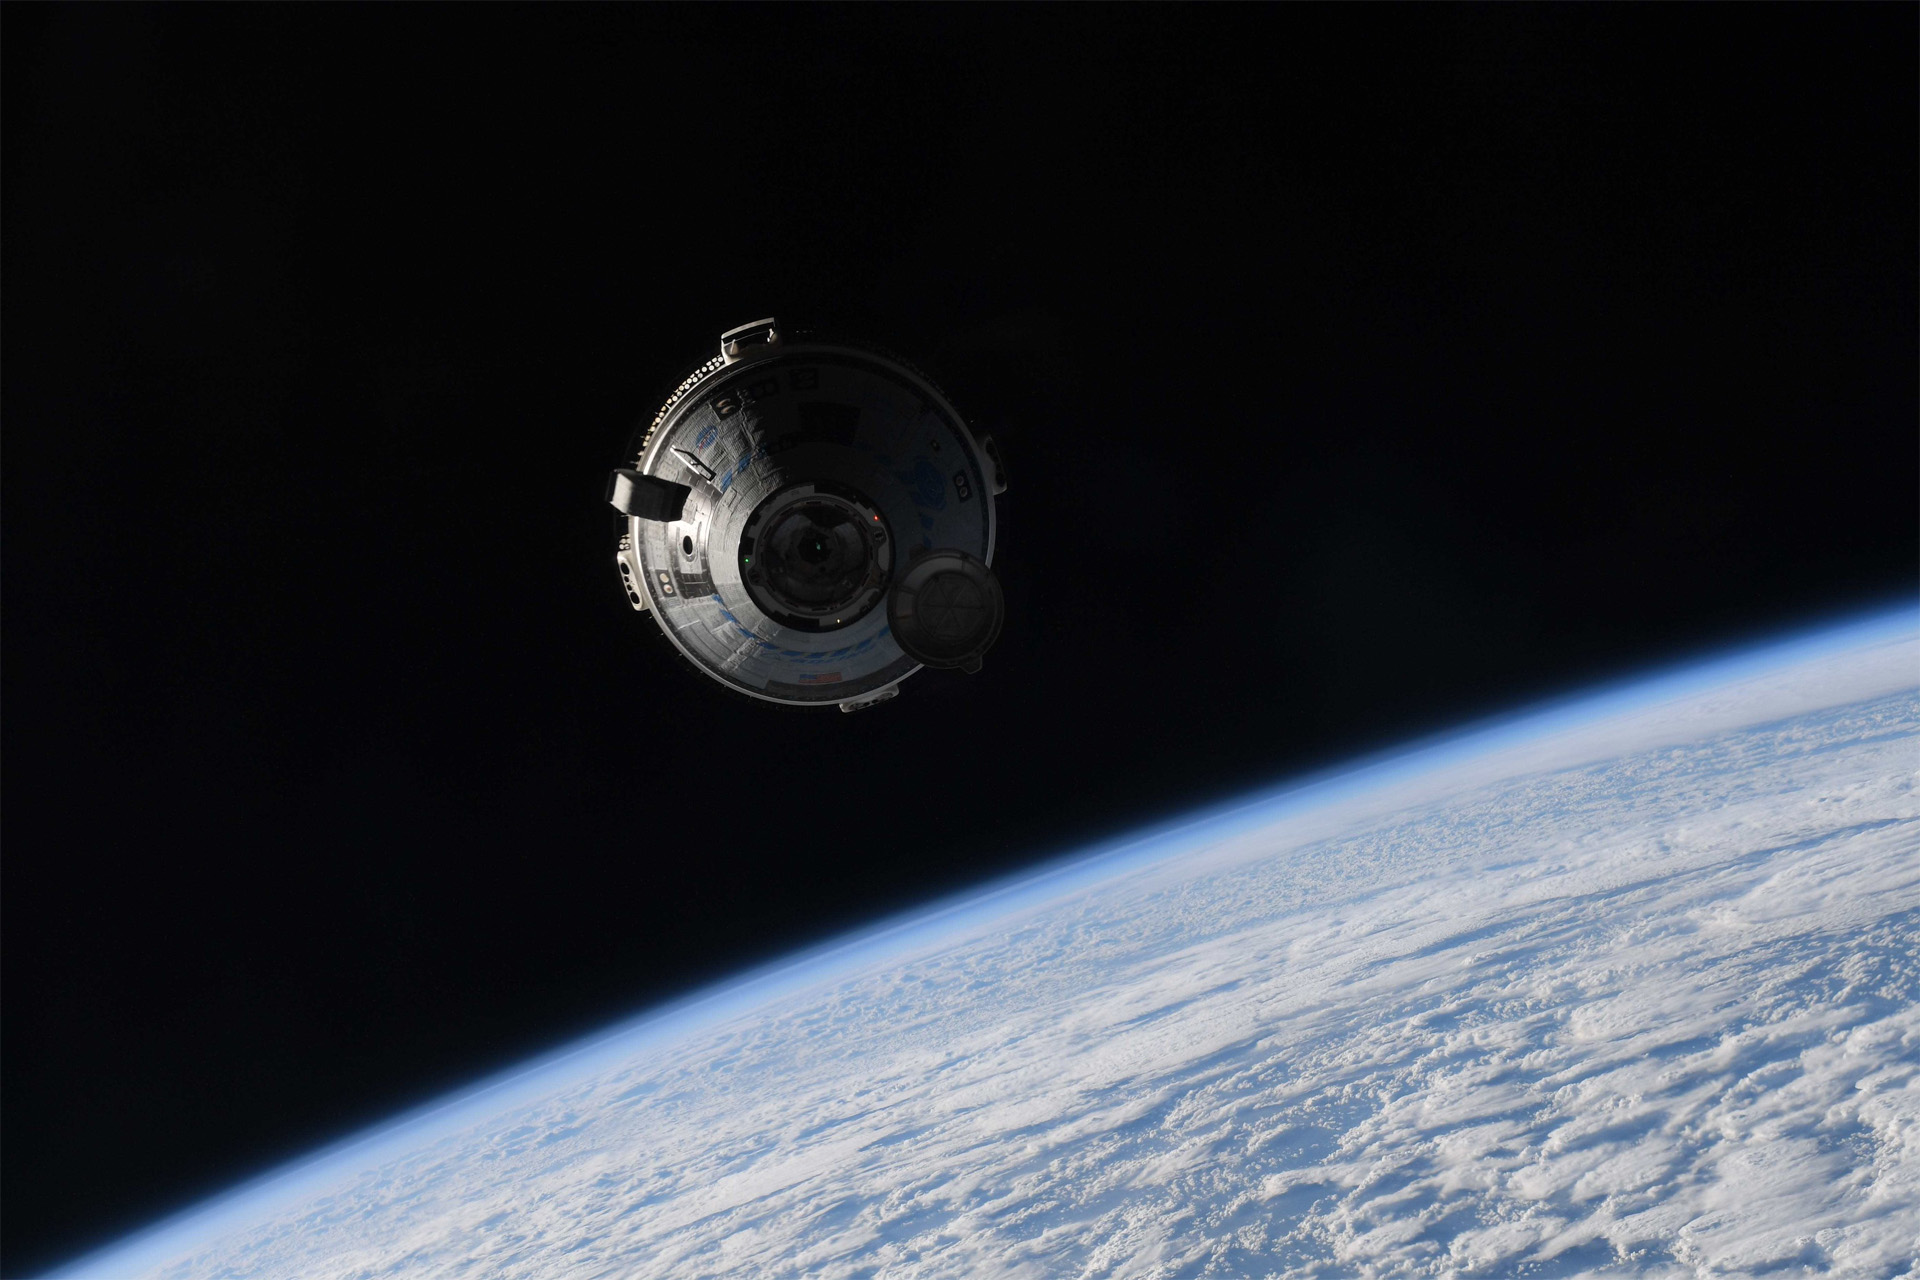 Photo of Boeing's Starliner approaching the ISS by astronaut Samantha Cristoforetti.